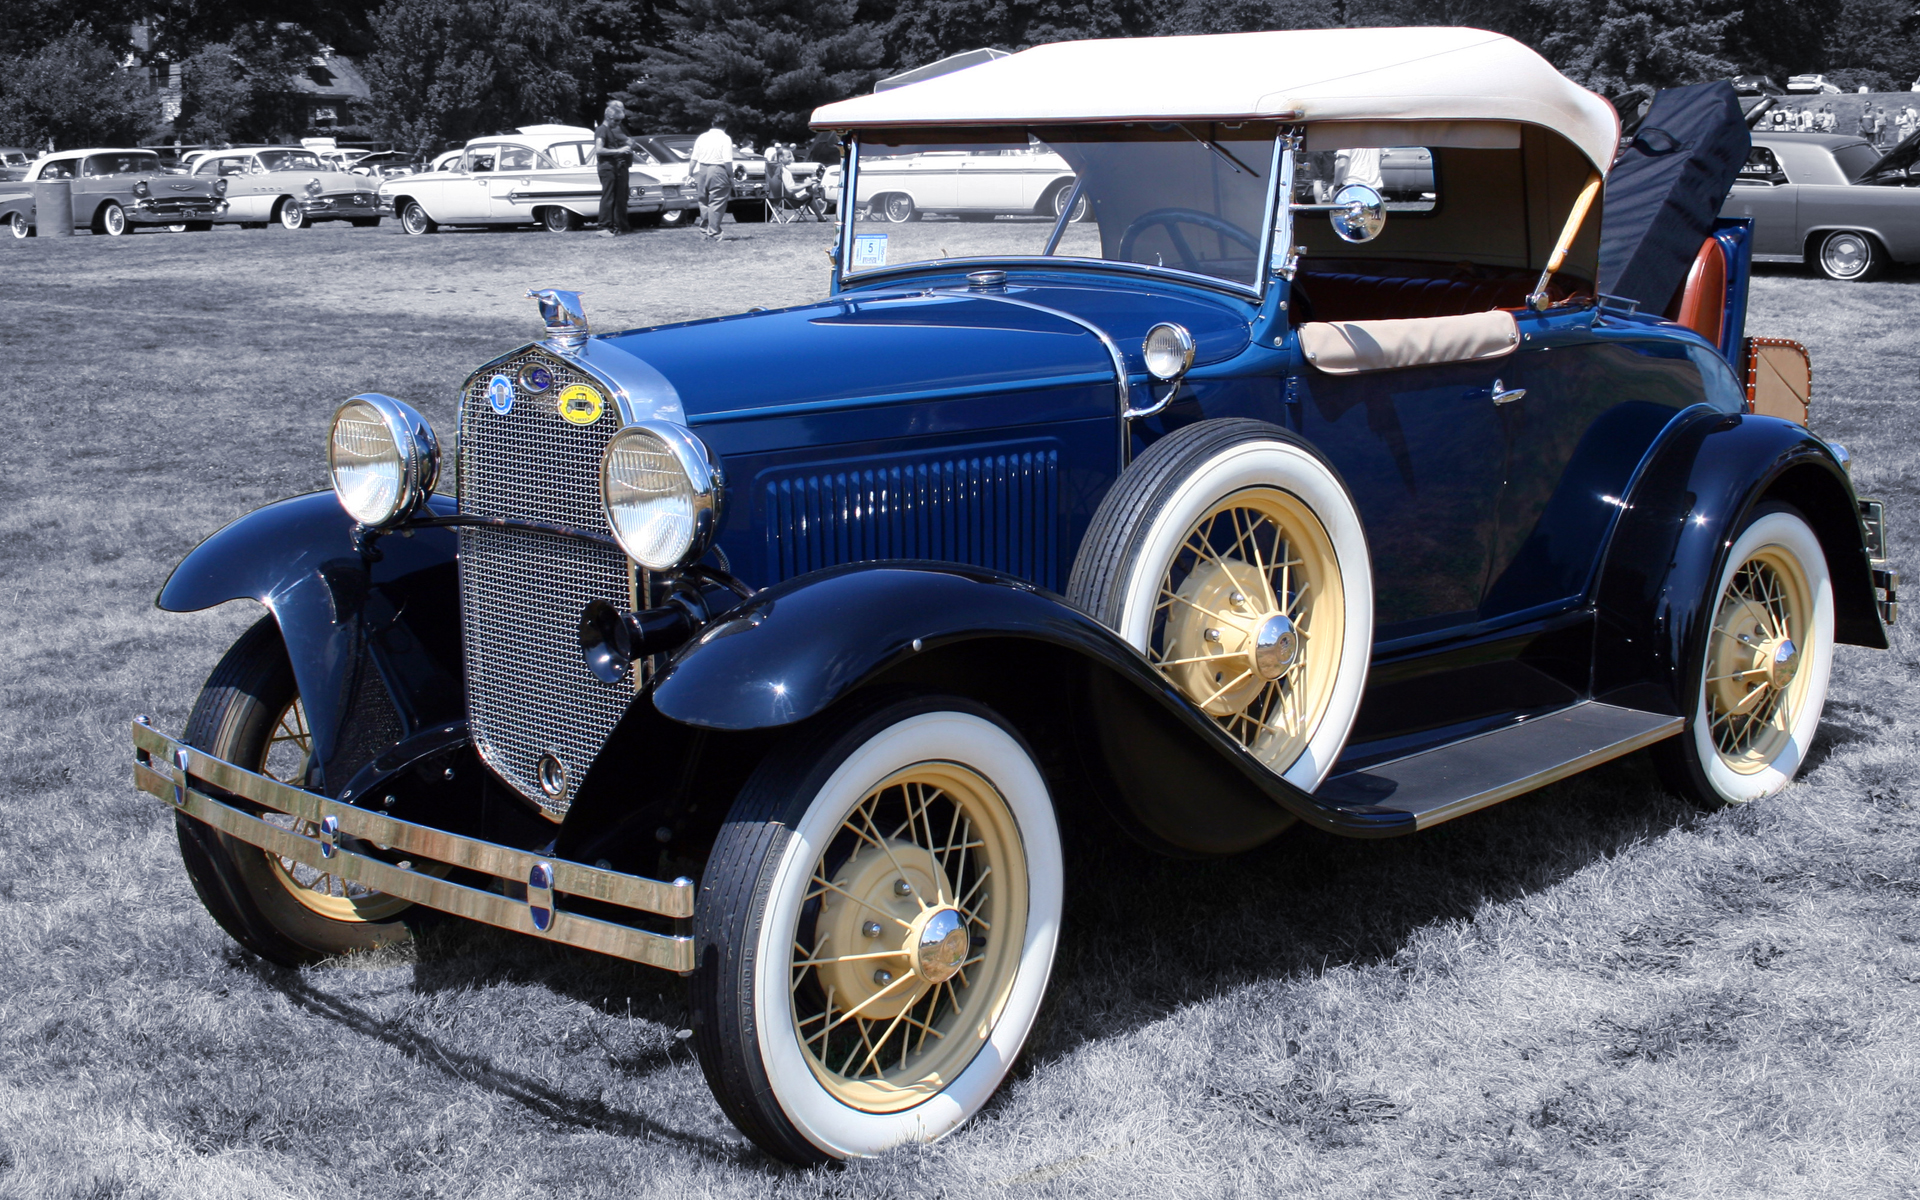 1929 Ford Model A Roadster Hd Wallpaper Background Image 1920x1200